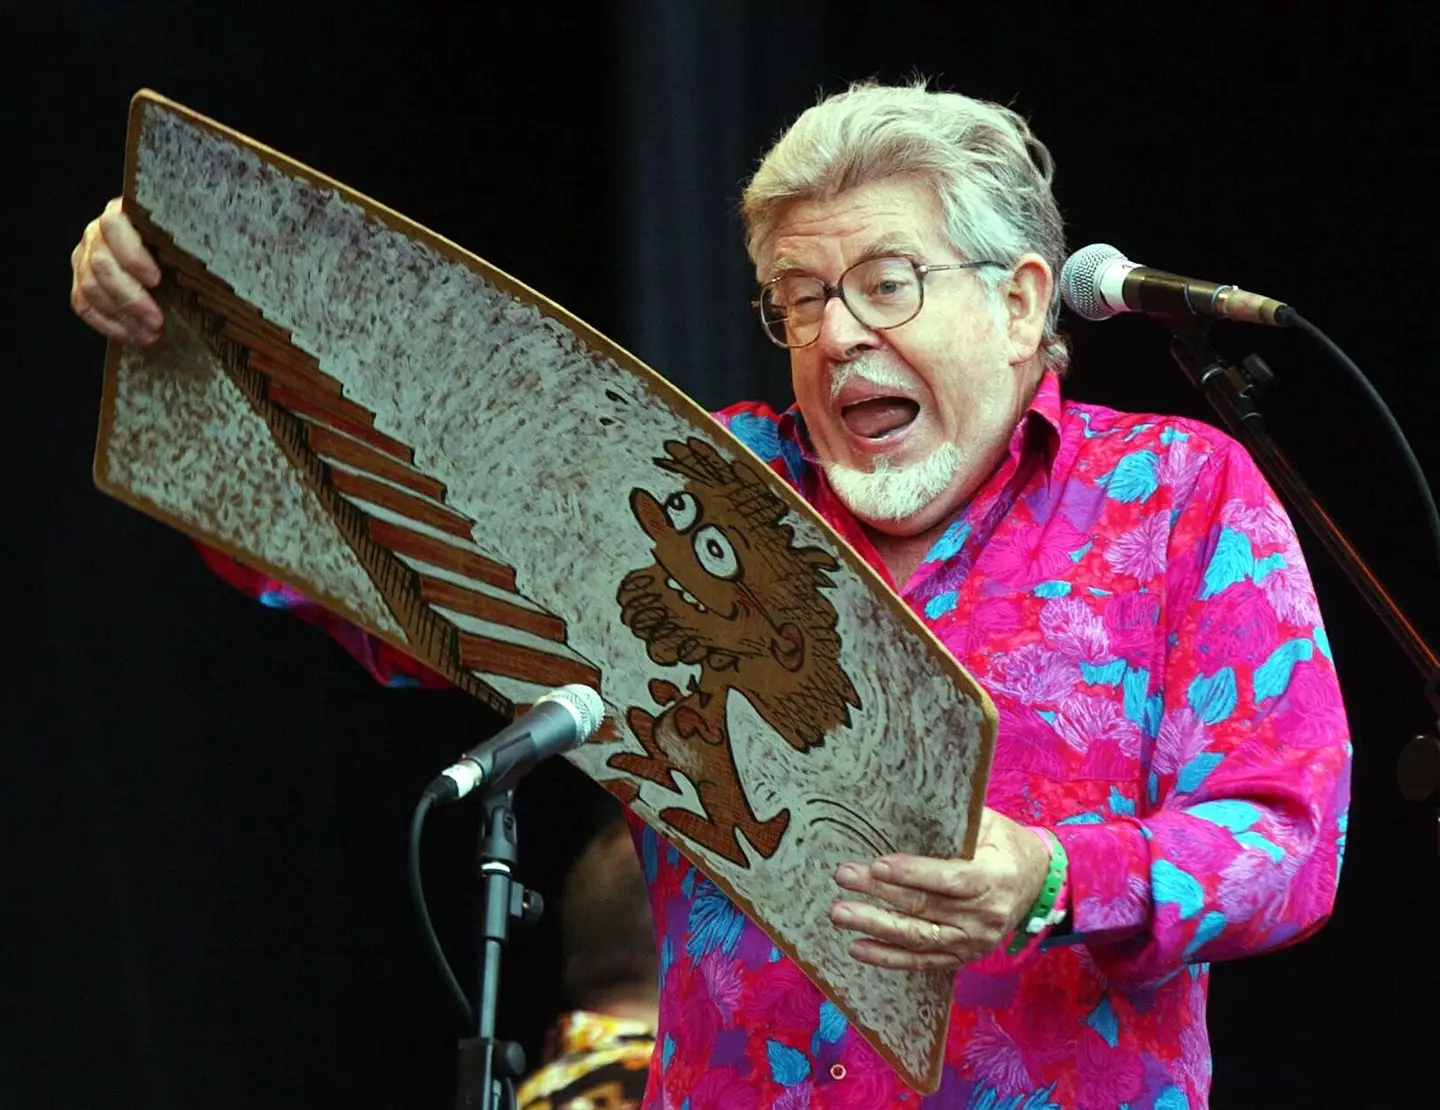 Rolf Harris plays the main stage at Glastonbury in 2002.